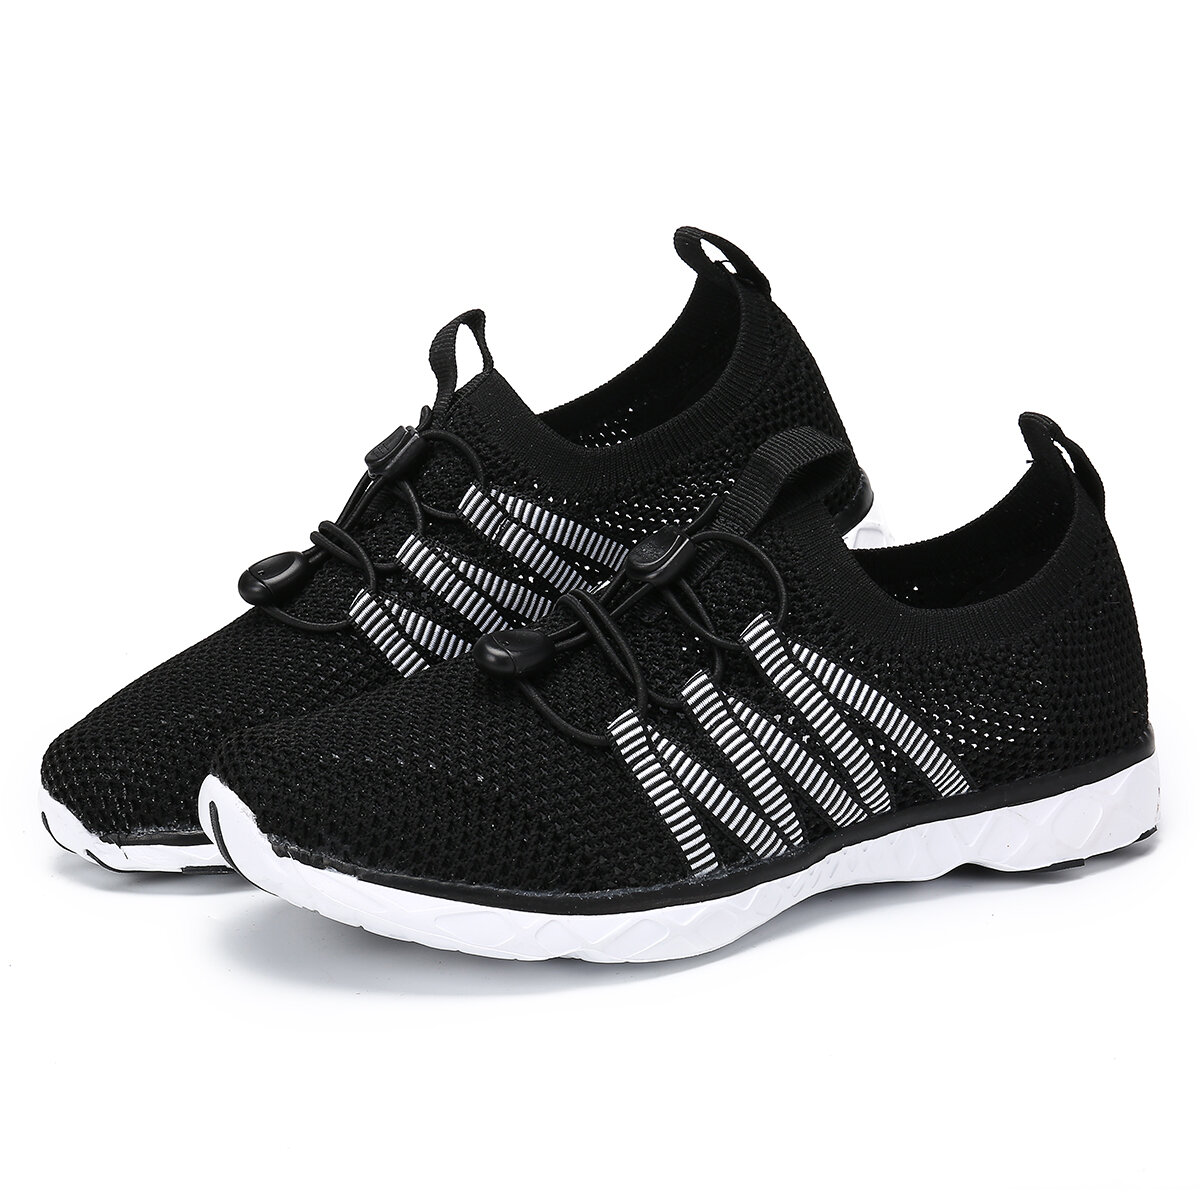 Unisex Mesh Running Shoes Lightweight Anti-slip Quick Drying Athletic Sneakers Outdoor Camping Walking Beach Shoes